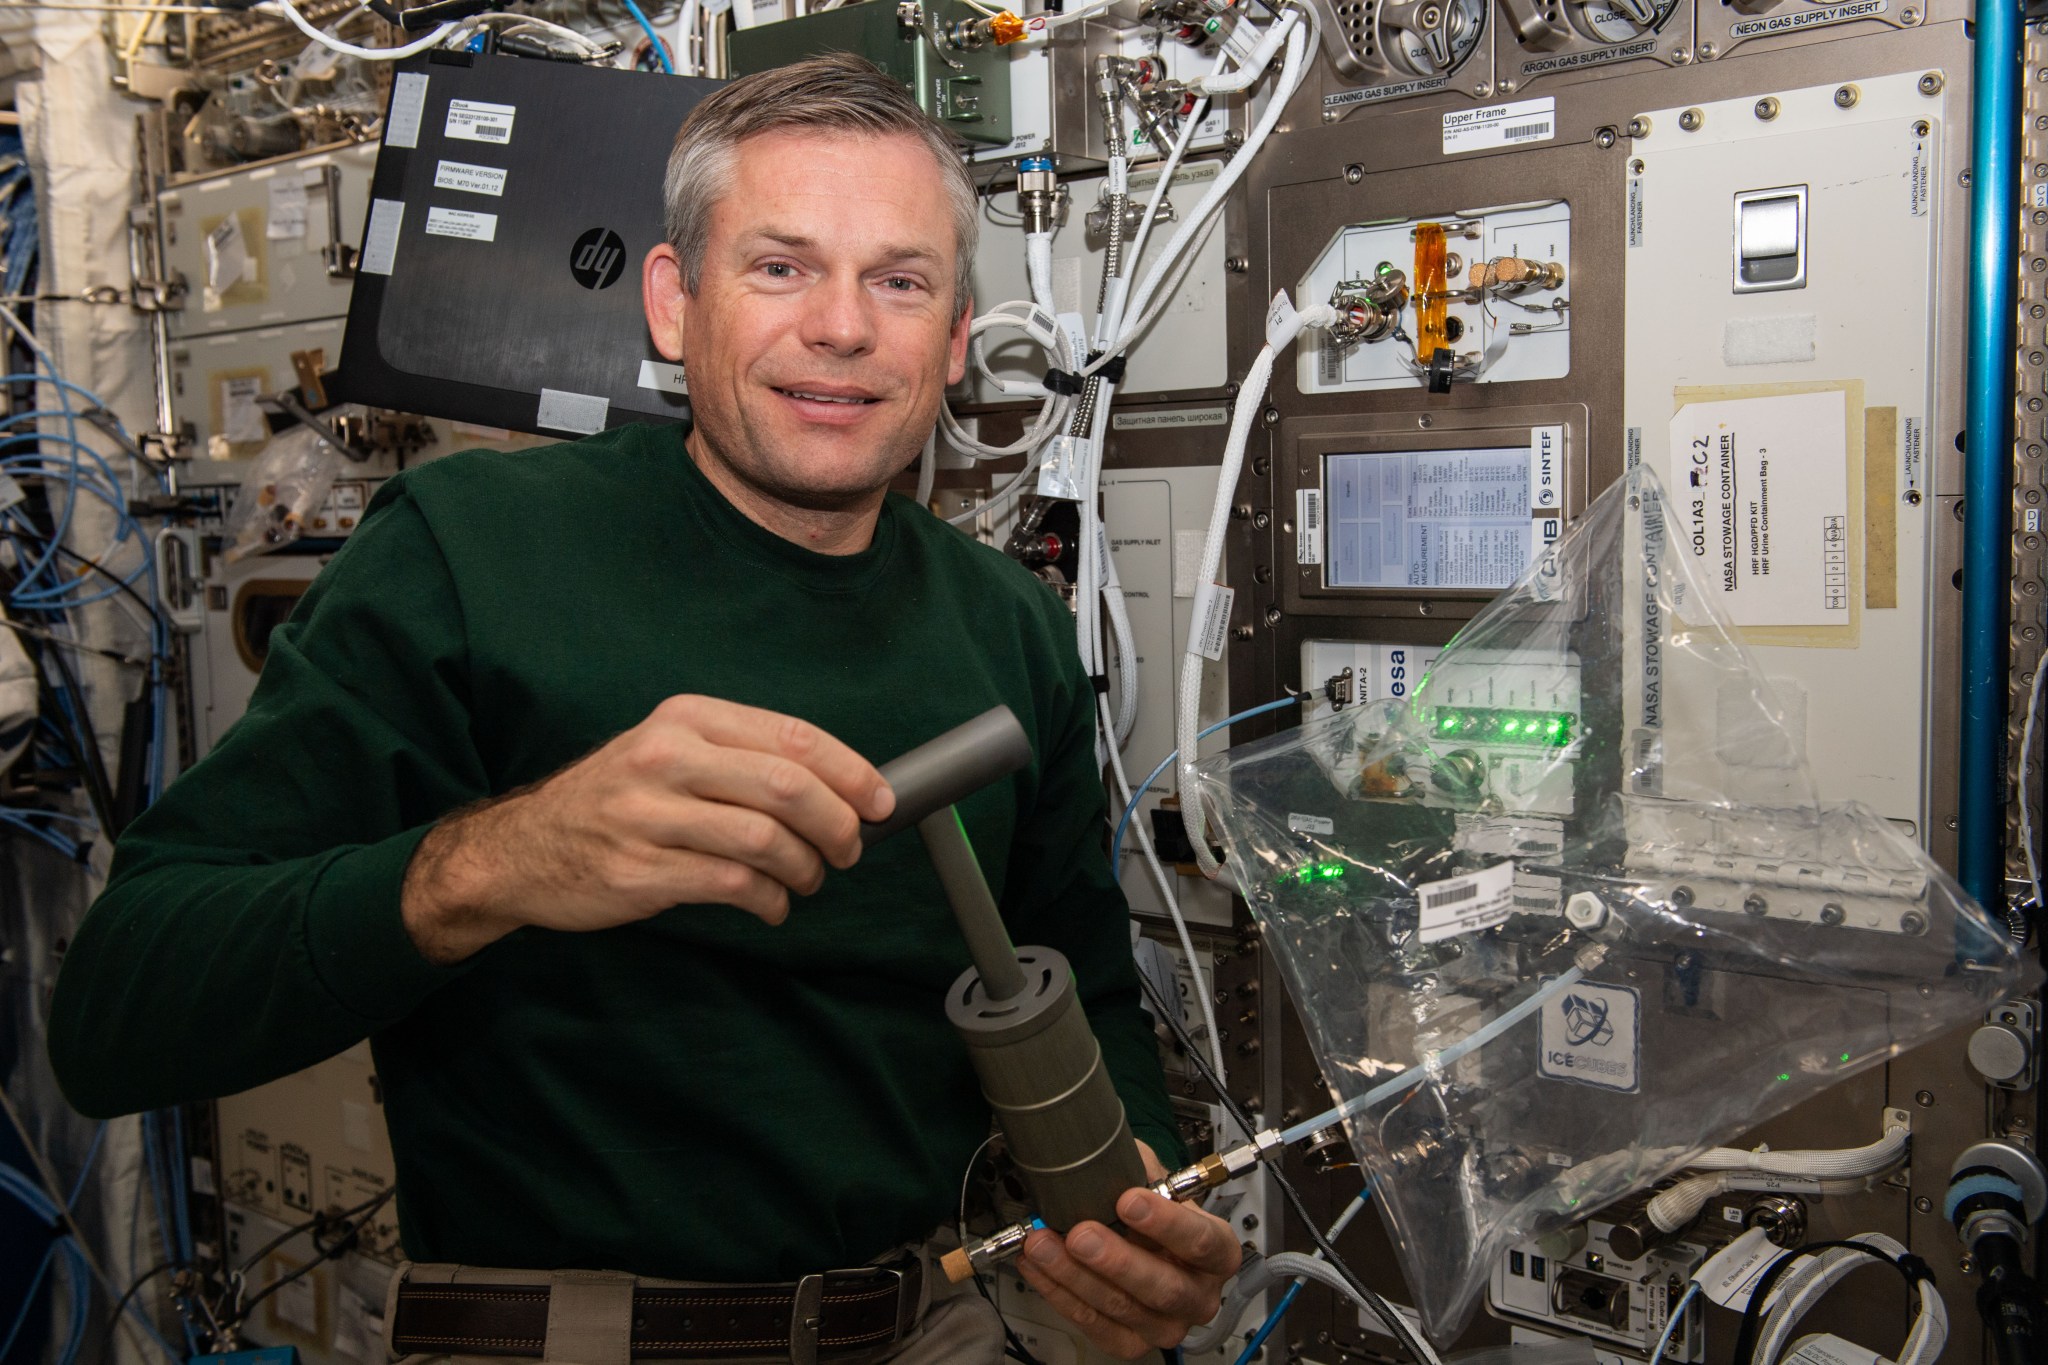 Expedition 70 Commander Andreas Mogensen of ESA (European Space Agency) demonstrates collecting air samples to analyze and quantify trace contaminants in the International Space Station's atmosphere. The Analyzing Interferometer for Ambient Air-2, or ANITA-2, serves as a technology demonstration in support of human exploration missions beyond low-Earth orbit.